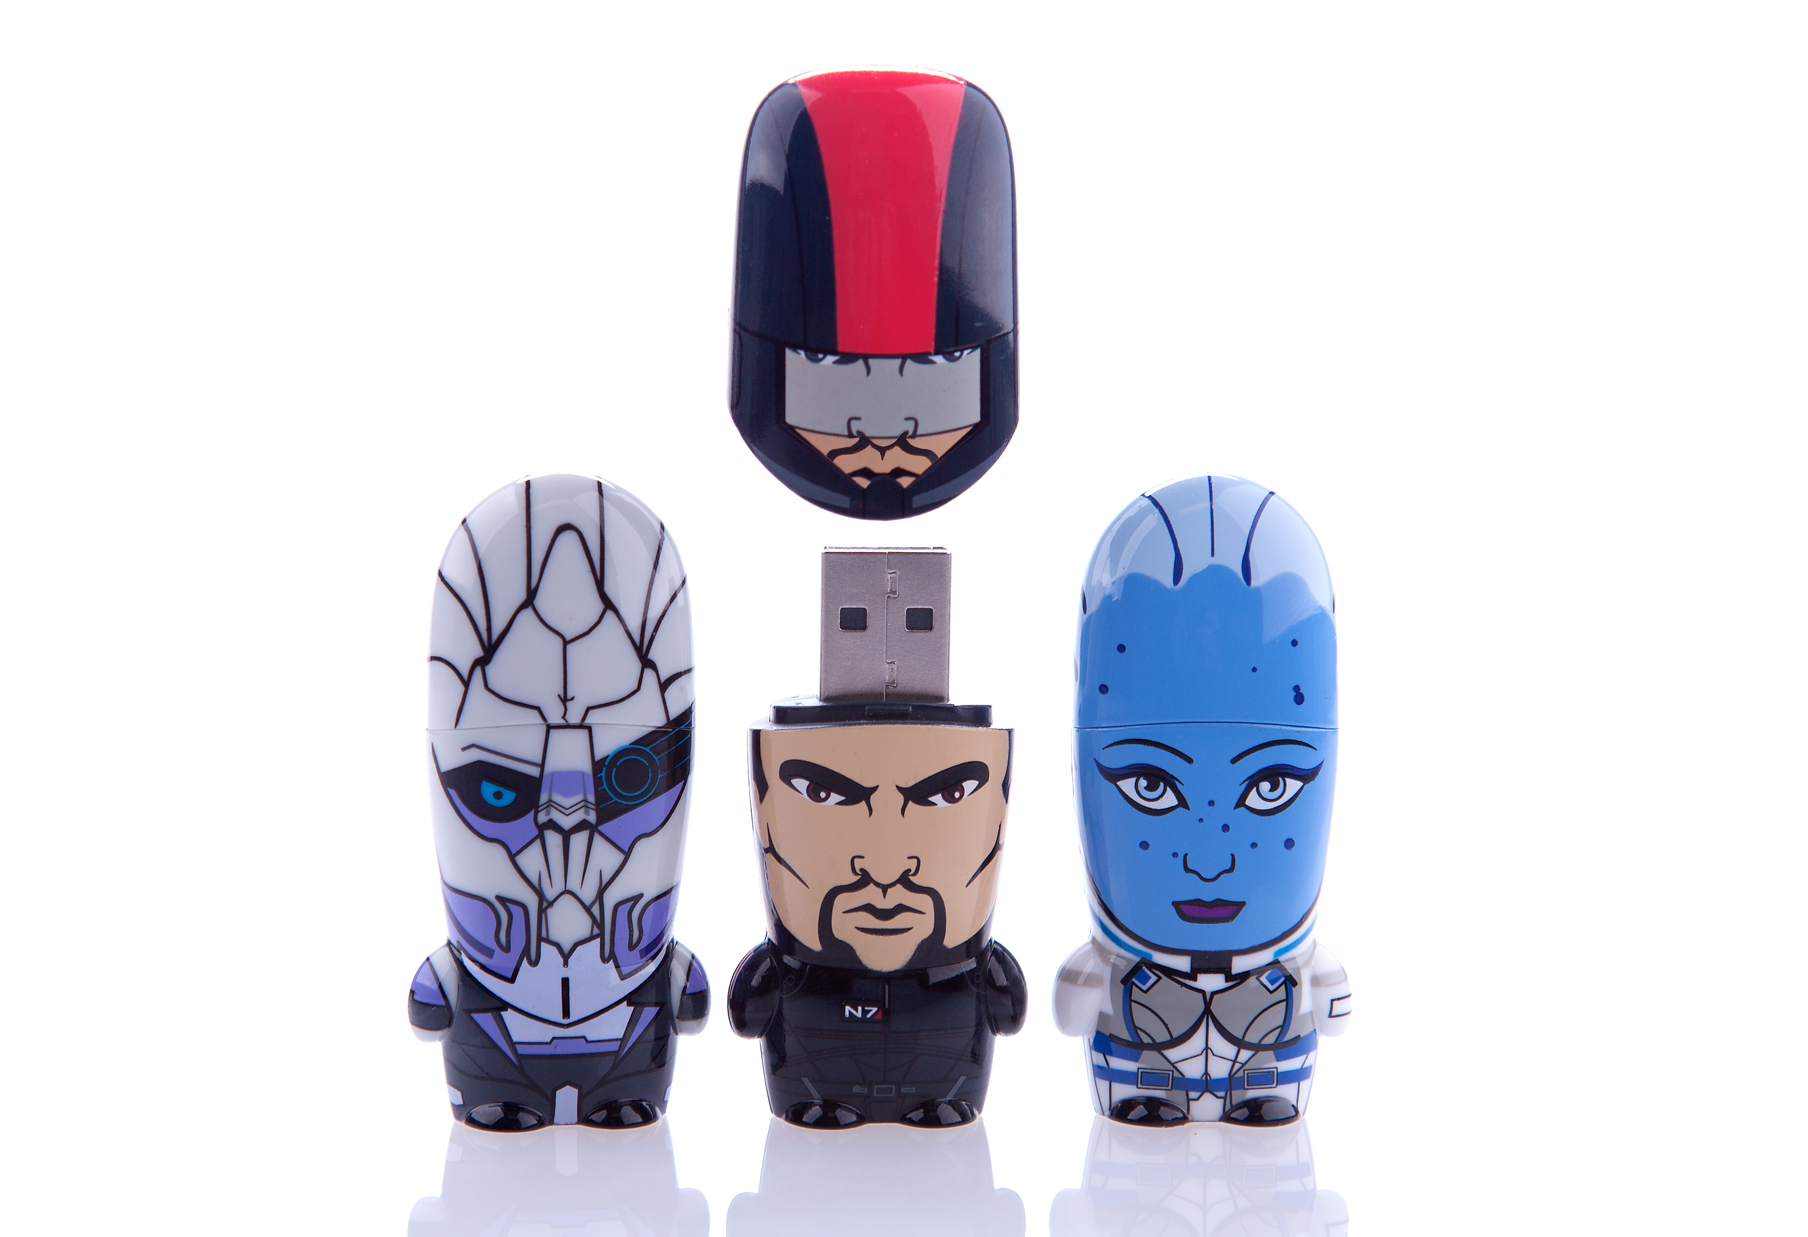 Mass Effect MIMOBOT USB Flash Drive for Mimoco by Lillian Lee Art & Design